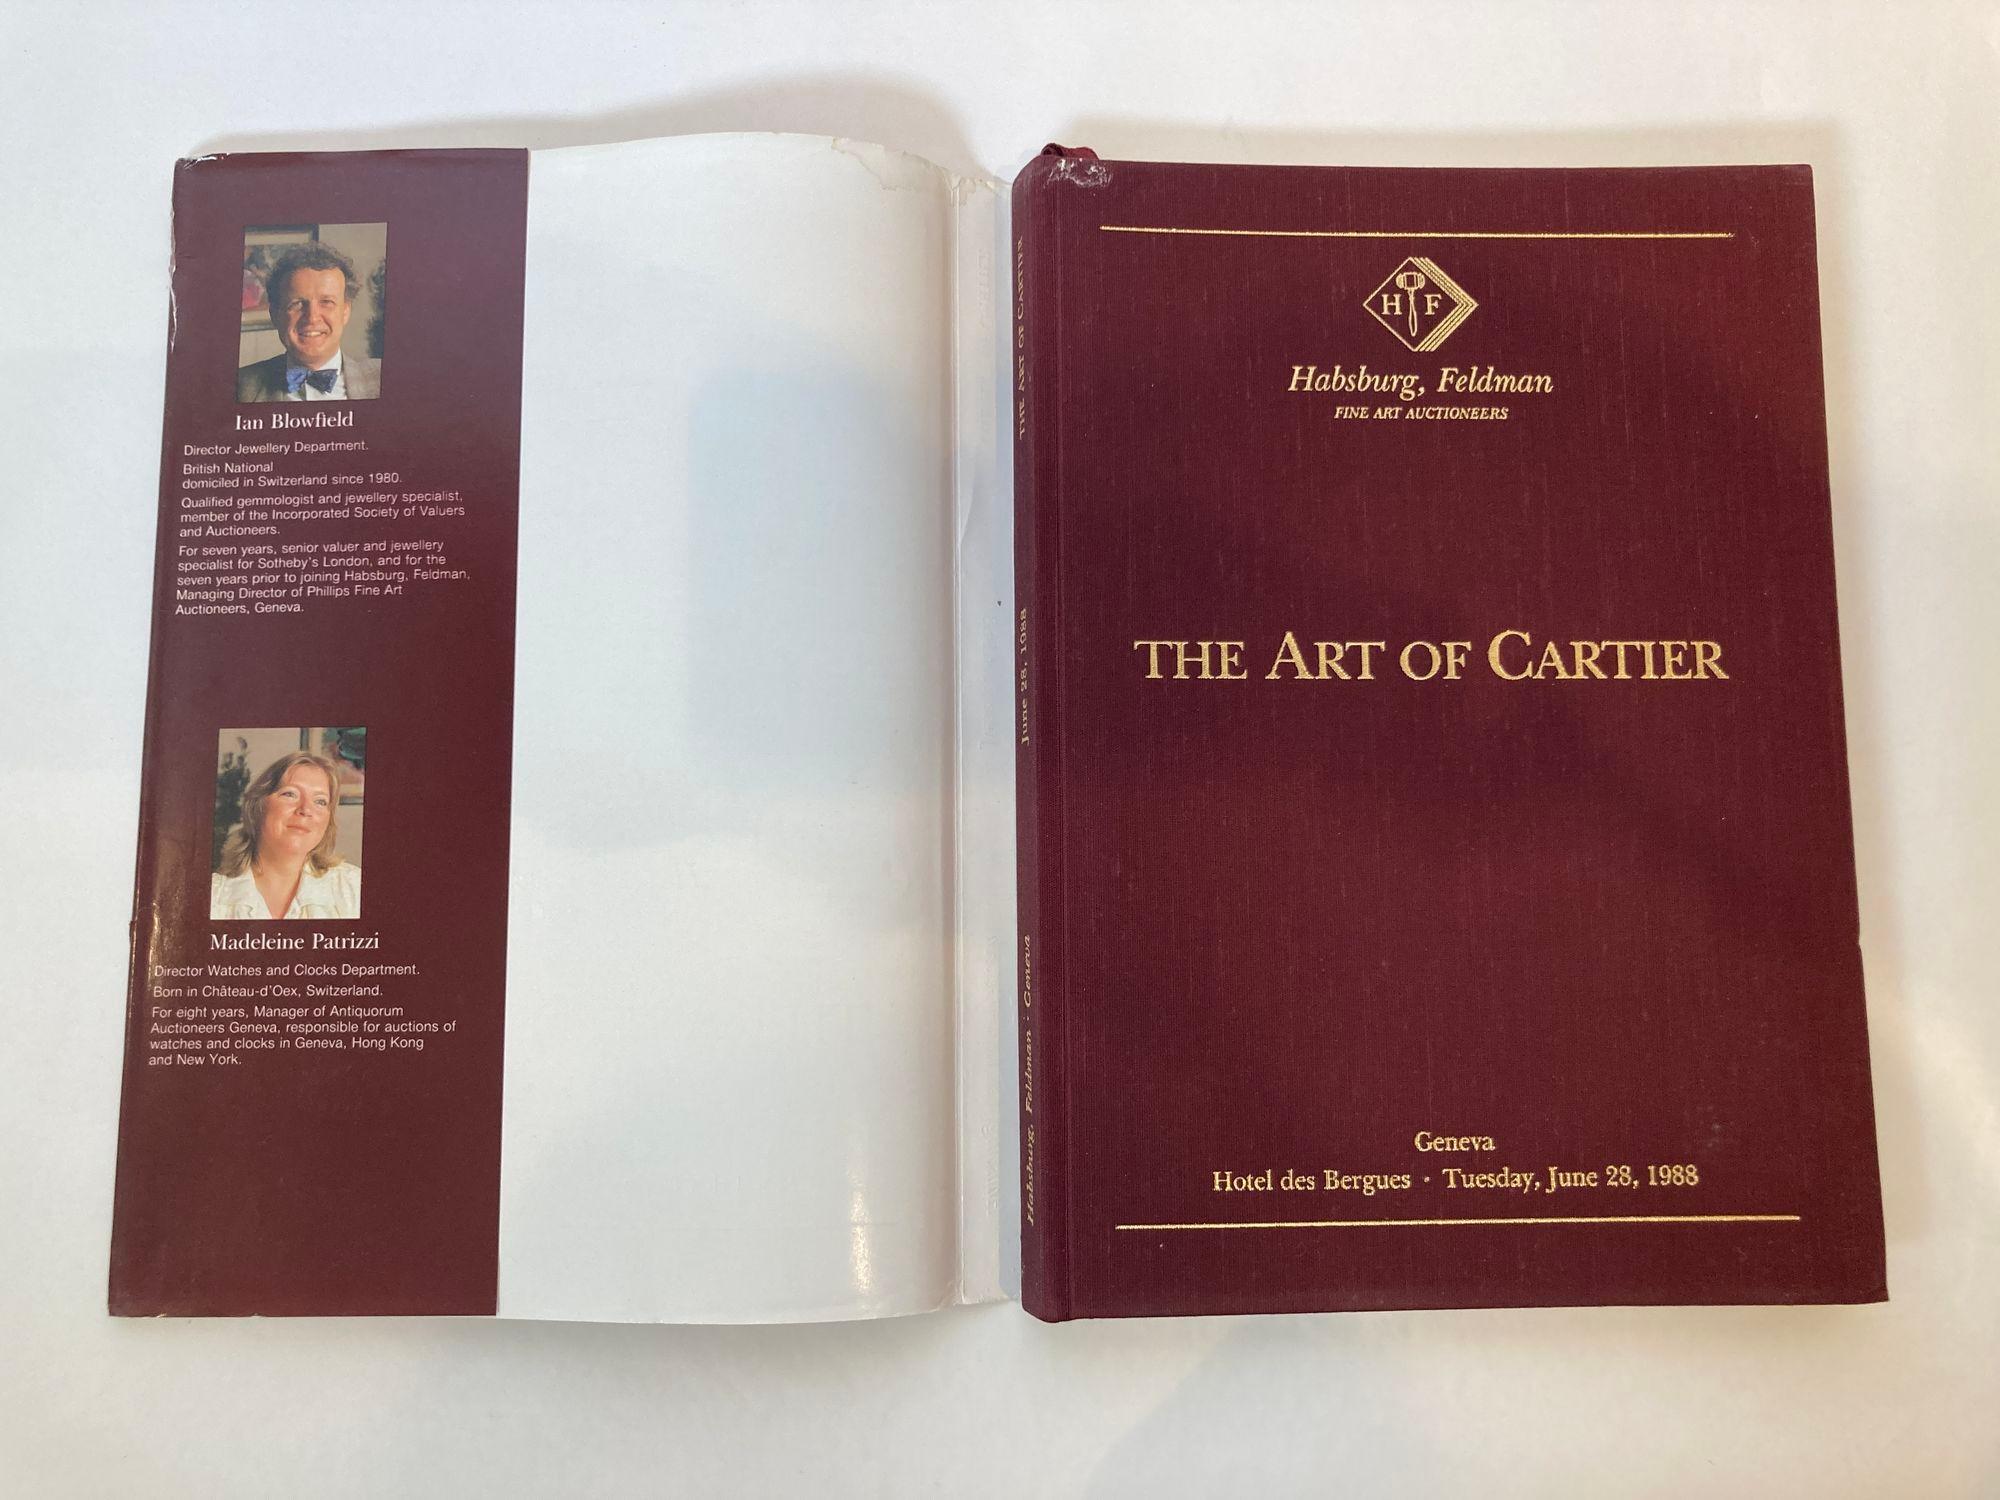 The Art of Cartier 1988 Genf Auktions-Hardcoverbuch im Zustand „Relativ gut“ im Angebot in North Hollywood, CA